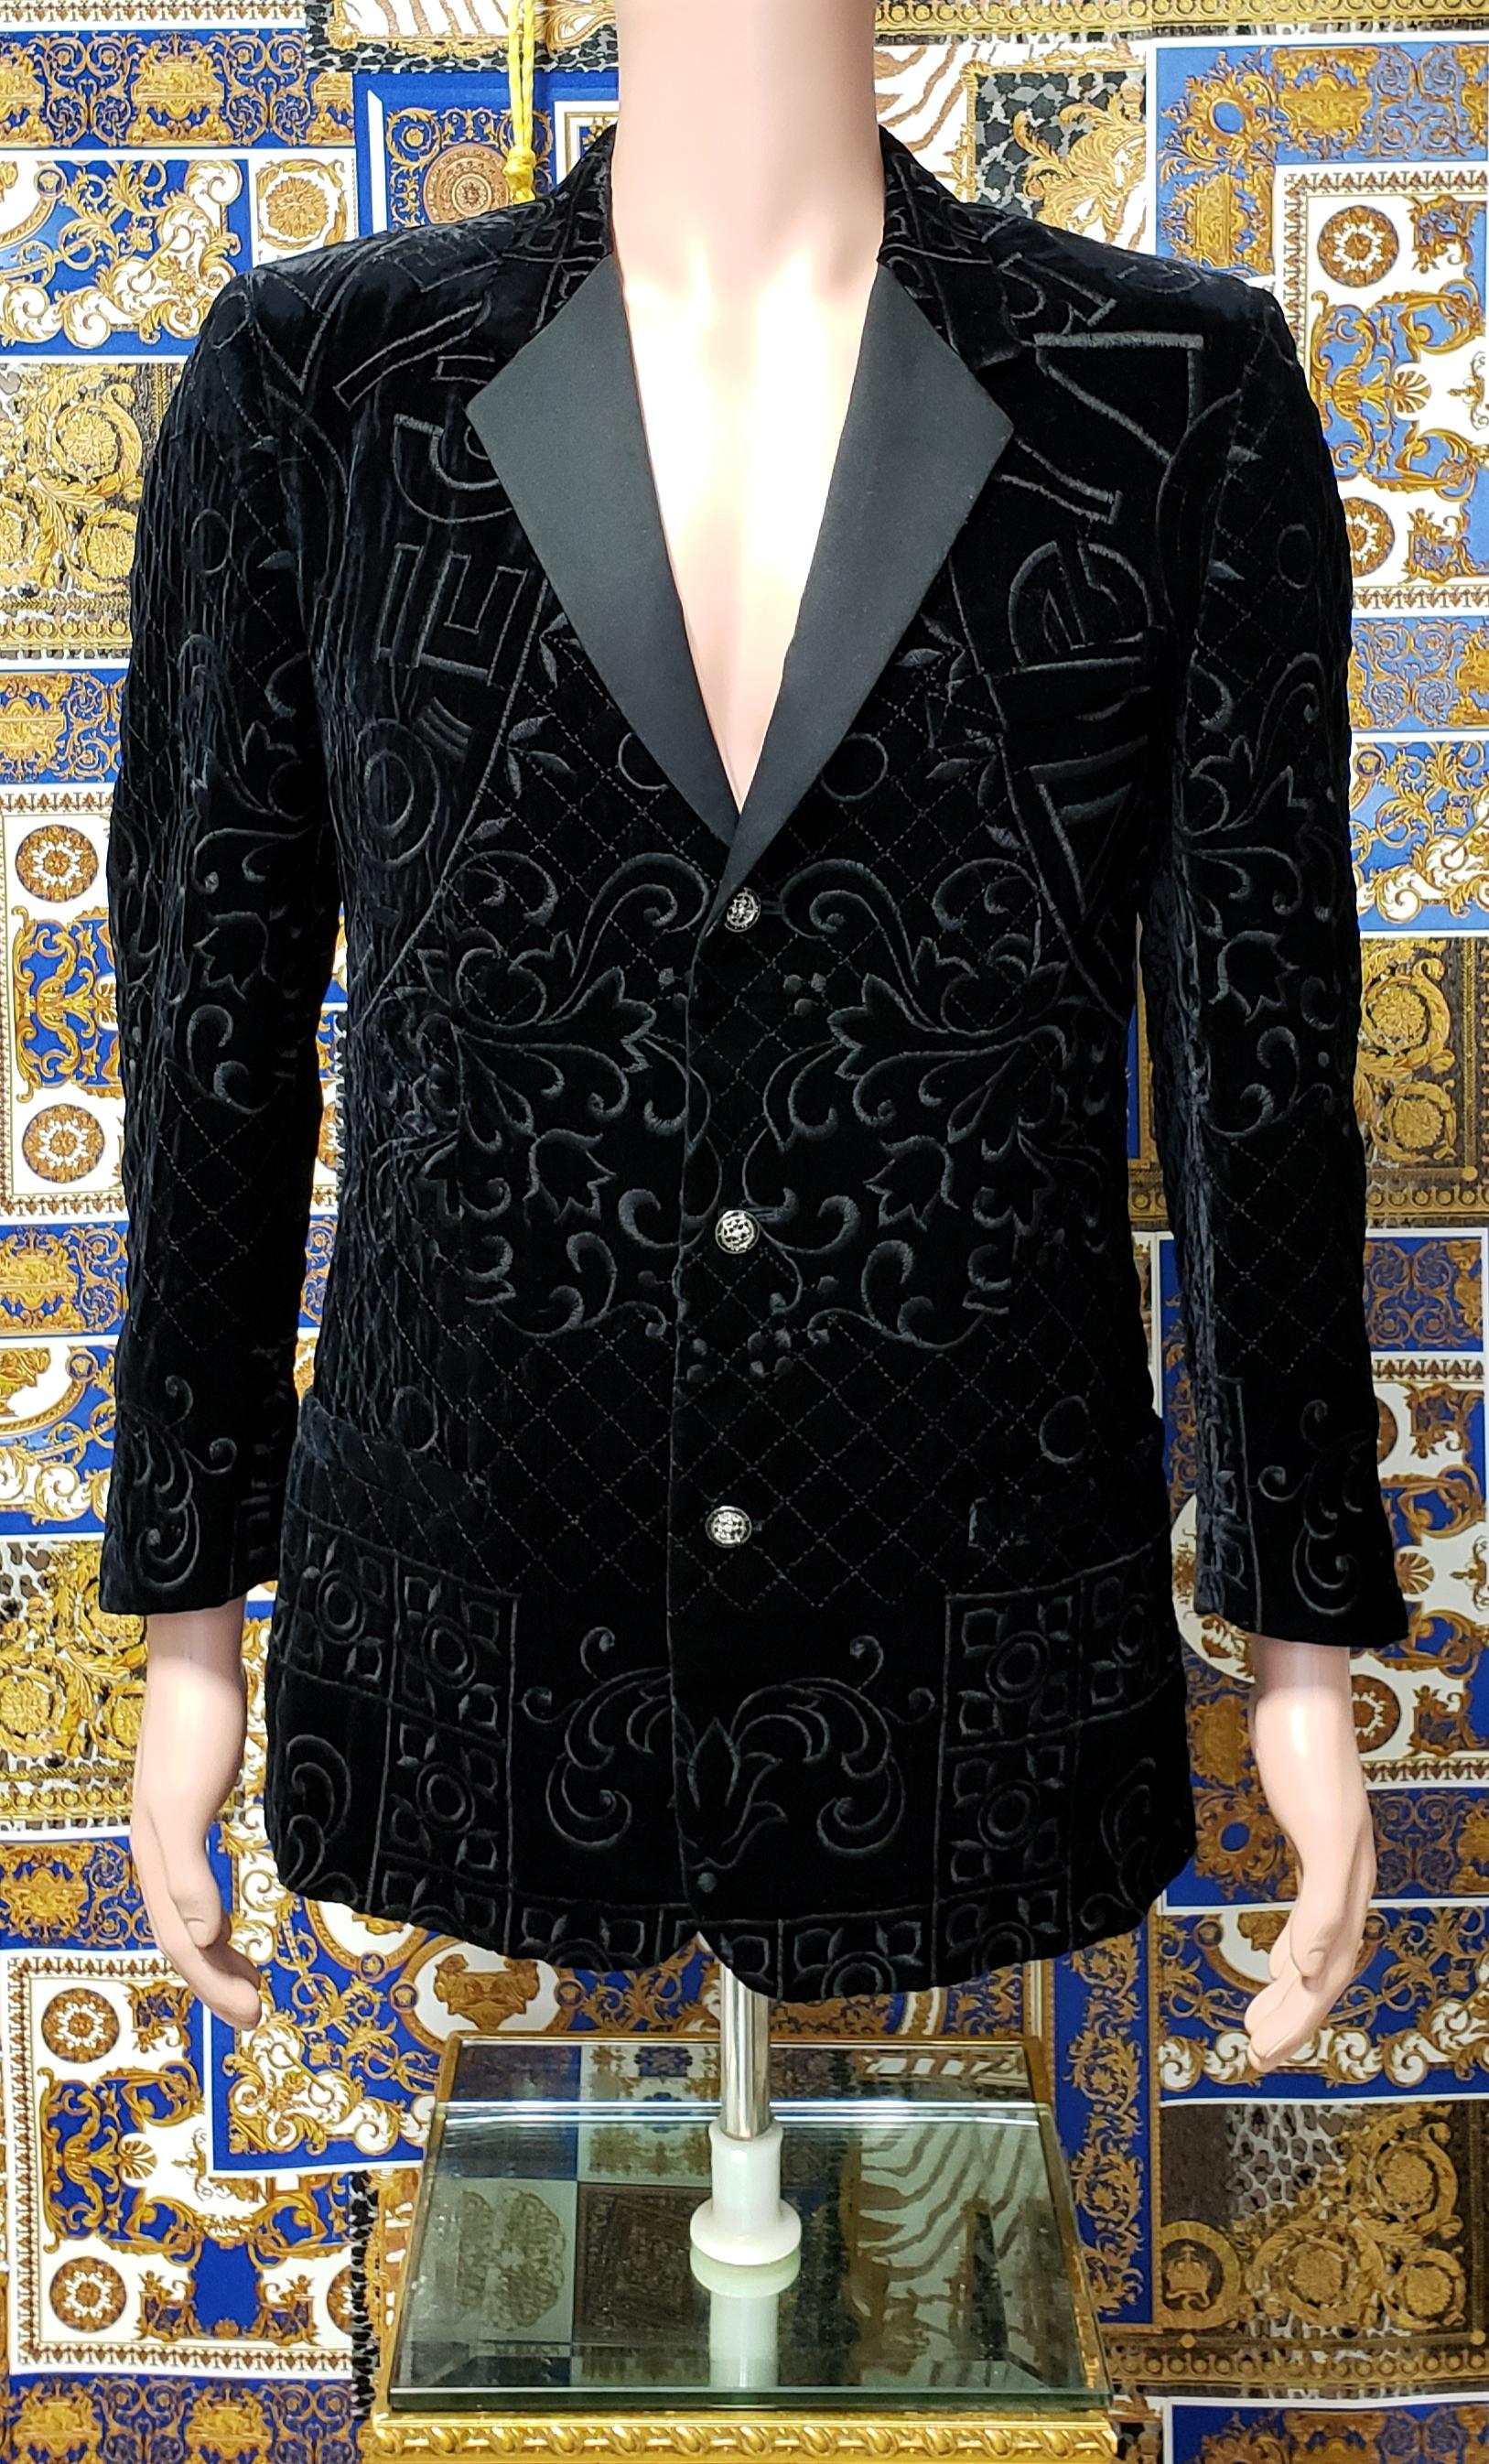 RARE VINTAGE GIANNI VERSACE BLACK VELVET BRAZER with EMBROIDERY

Circa 1991

This black velvet blazer from Gianni Versace features an embroidery,
quilting and a front button fastening.

Excellent condition. Like new.

Italian size is 48 - US